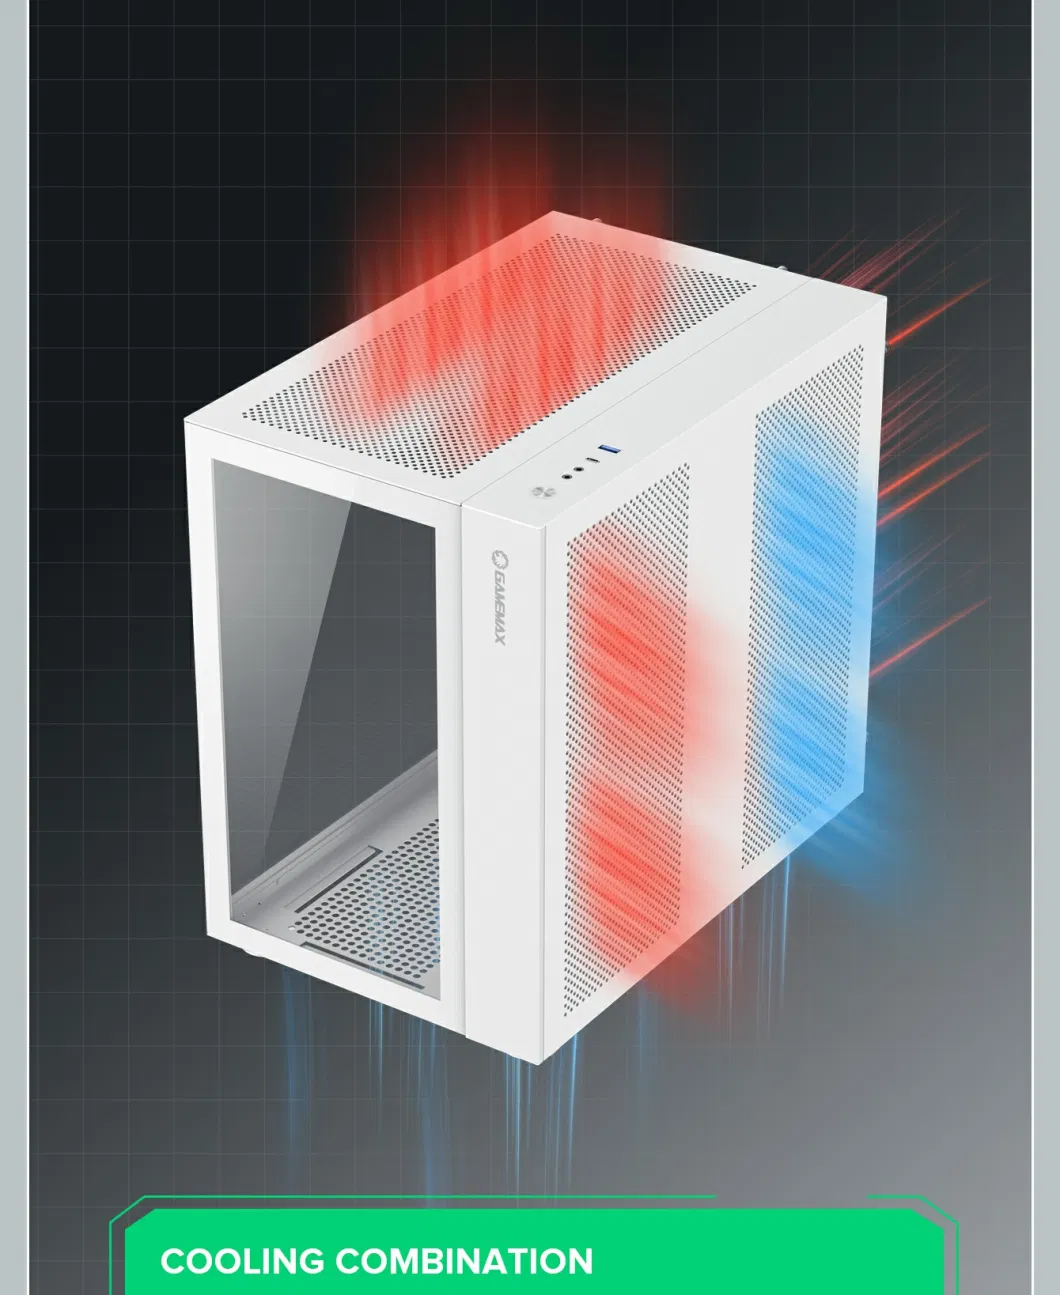 Gamemax Infinity Cube Computer Case for Build Owned Gaming PC Case